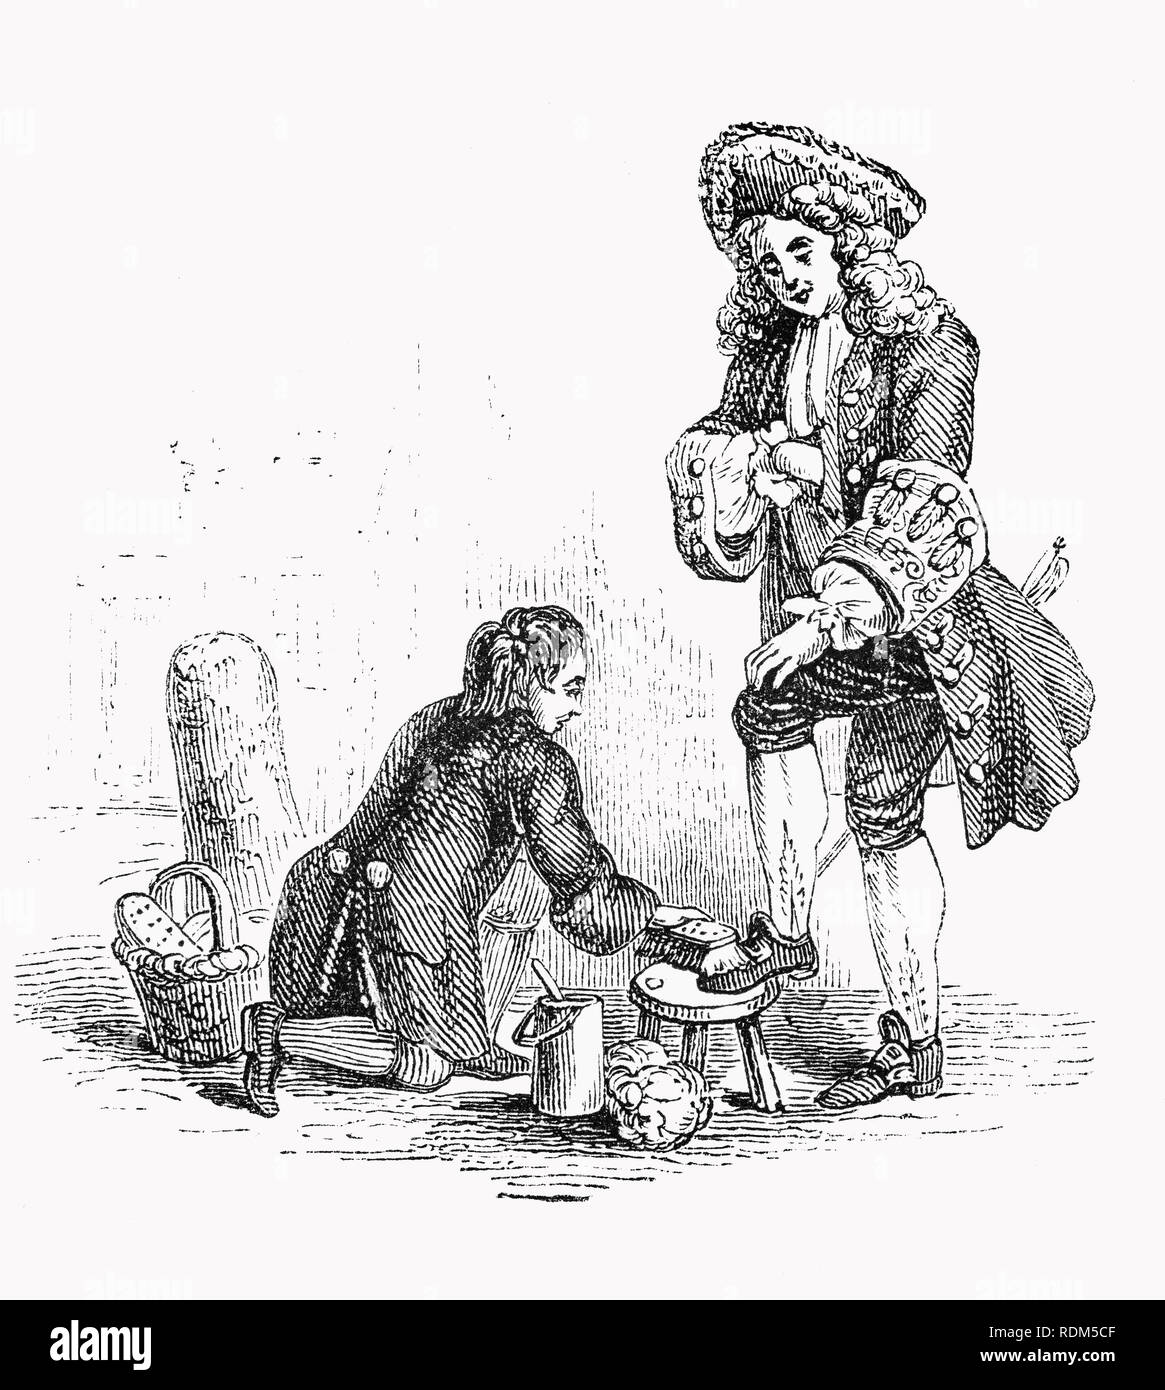 Shoeshiner or boot polisher in 18th Century London, England; an occupation in which a person polishes shoes with shoe polish. They are often known as shoeshine boys because the job is traditionally that of a male child. Other synonyms are bootblack and shoeblack. While the role is denigrated in much of Western civilization, shining shoes is an important source of income for many children and families throughout the world. Stock Photo